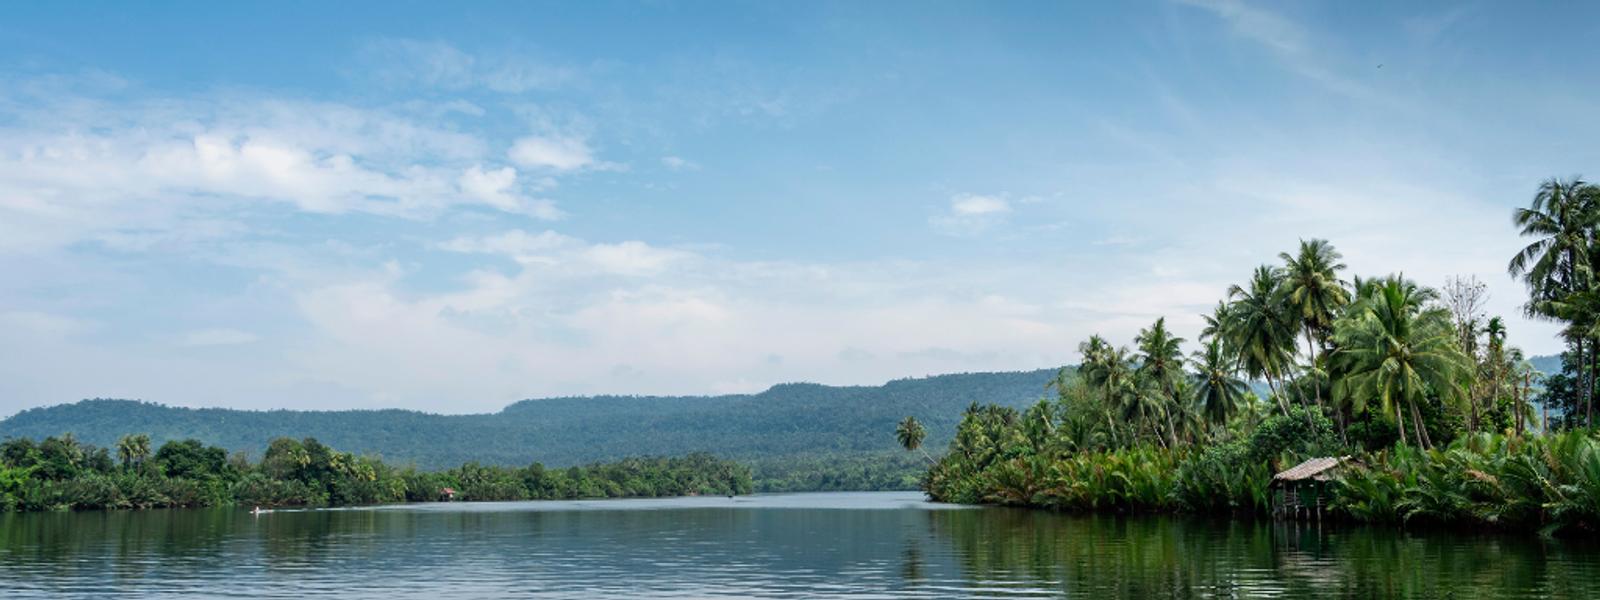 River with Cardamom Mountains in distance